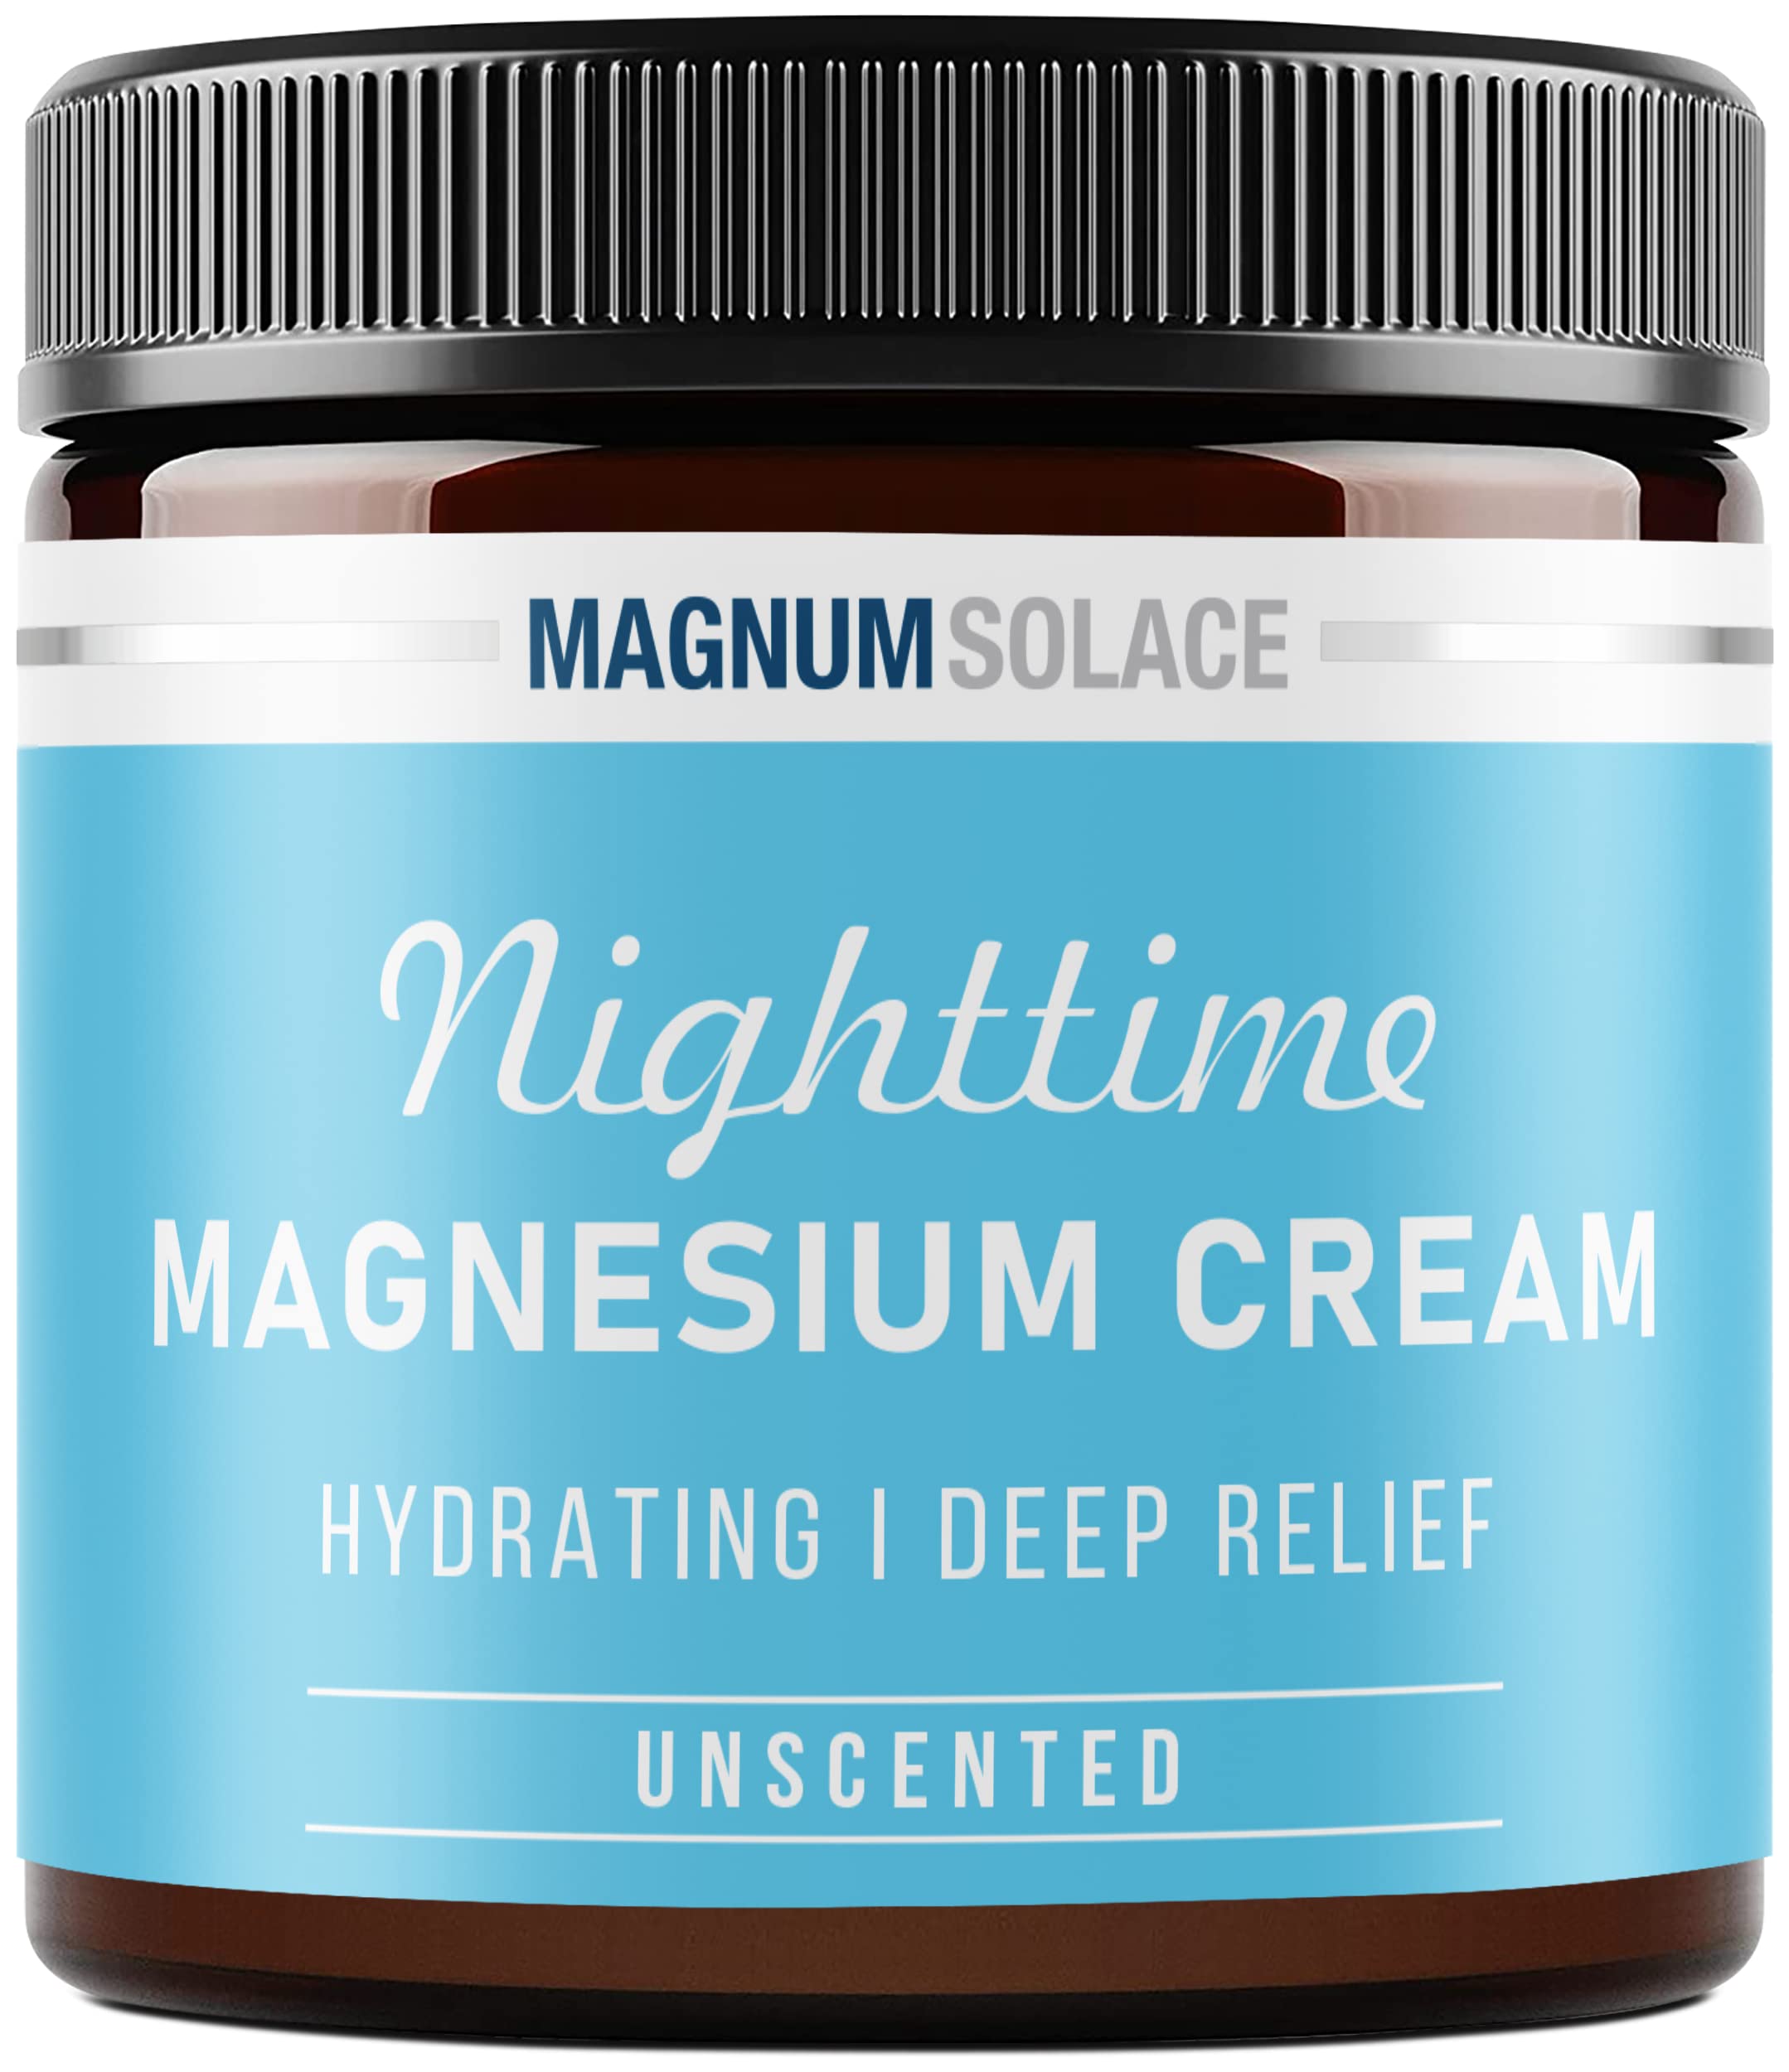 Magnesium Lotion – Nighttime Magnesium Cream – Apply to Legs, Arms or Chest - Topical Magnesium Chloride – USA Made and Safe for Kids (Unscented)